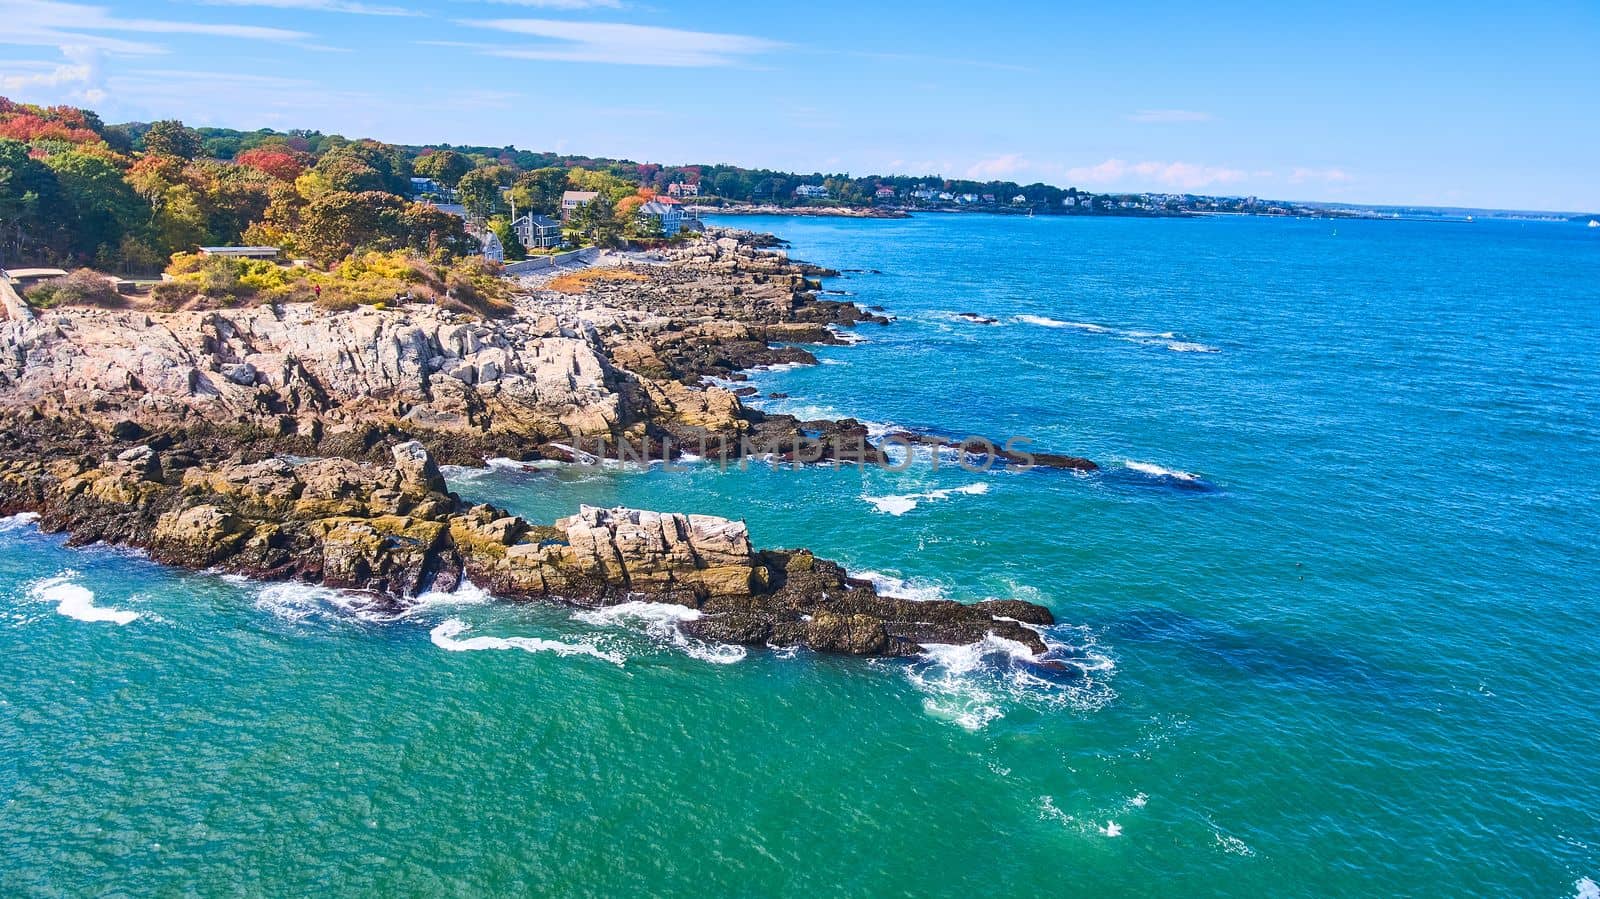 Aerial over ocean with rocky Maine coastline covered in homes by njproductions